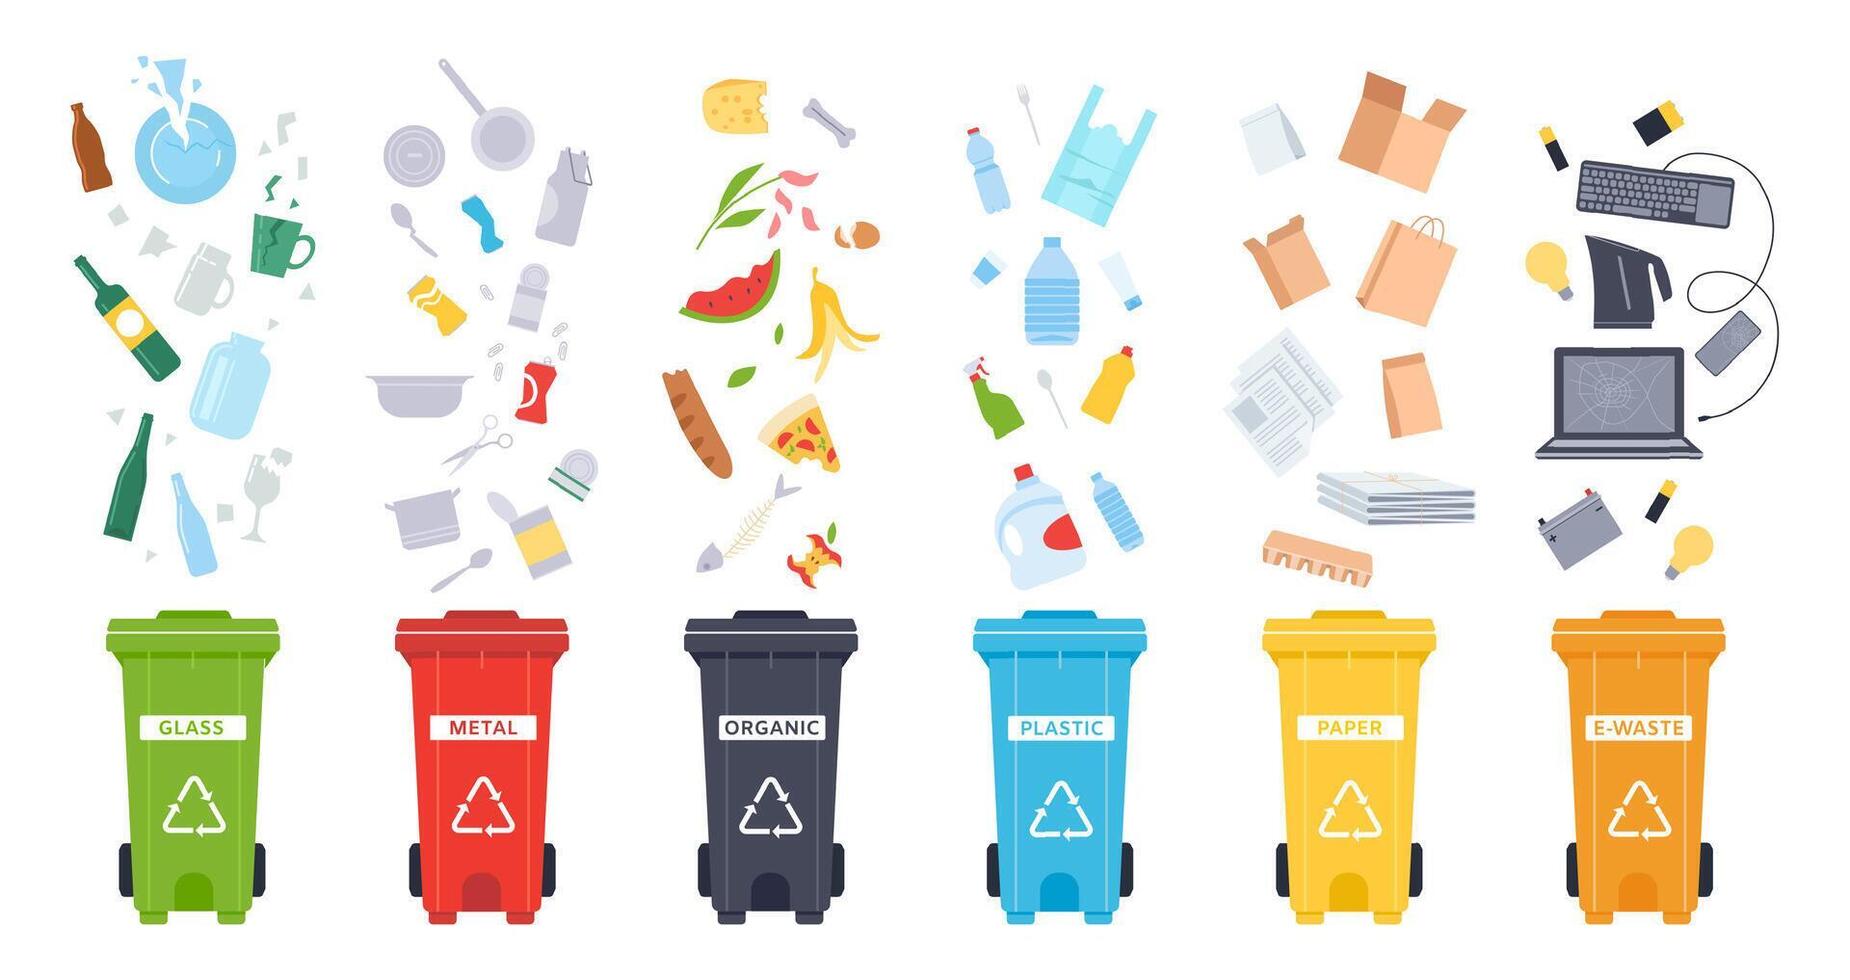 Trash containers. Organic, e-waste, plastic, paper, glass and metal trash containers. Recycling garbage to save the environment vector illustration set. Waste sorting. Rubbish cans on white background